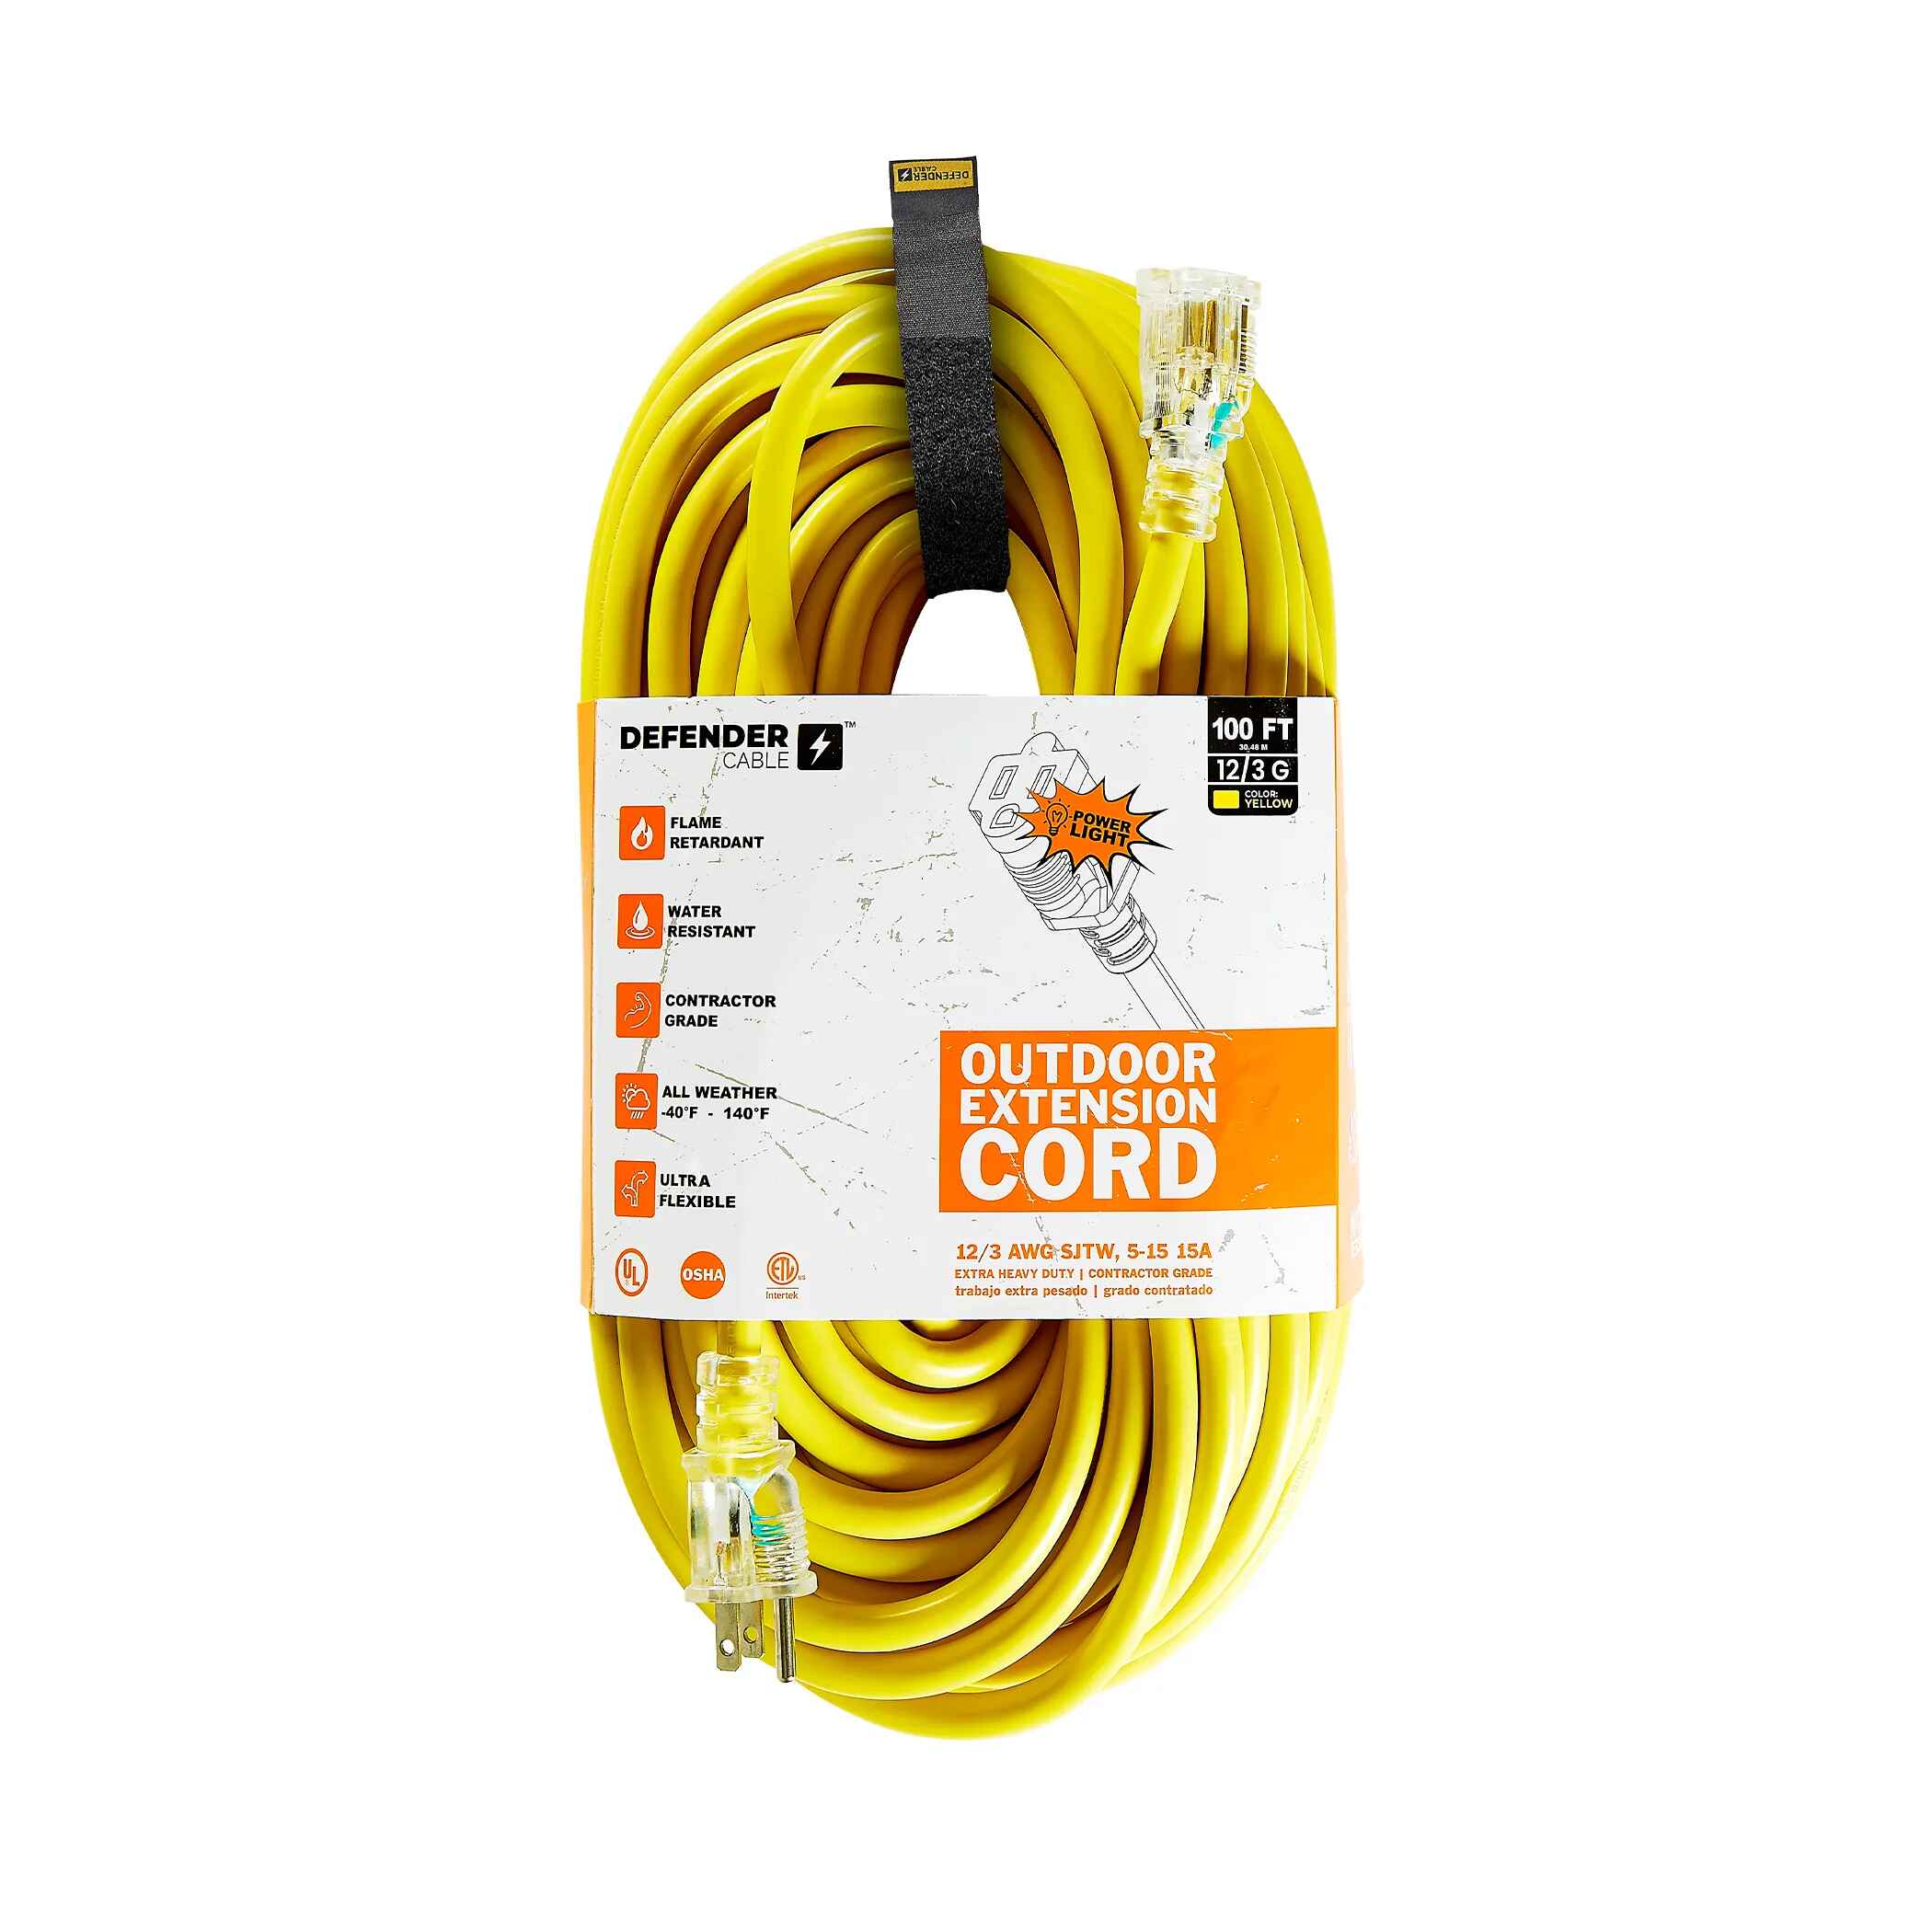 3/32 TACTICAL CORD 100 FT. - Army Surplus Warehouse, Inc.